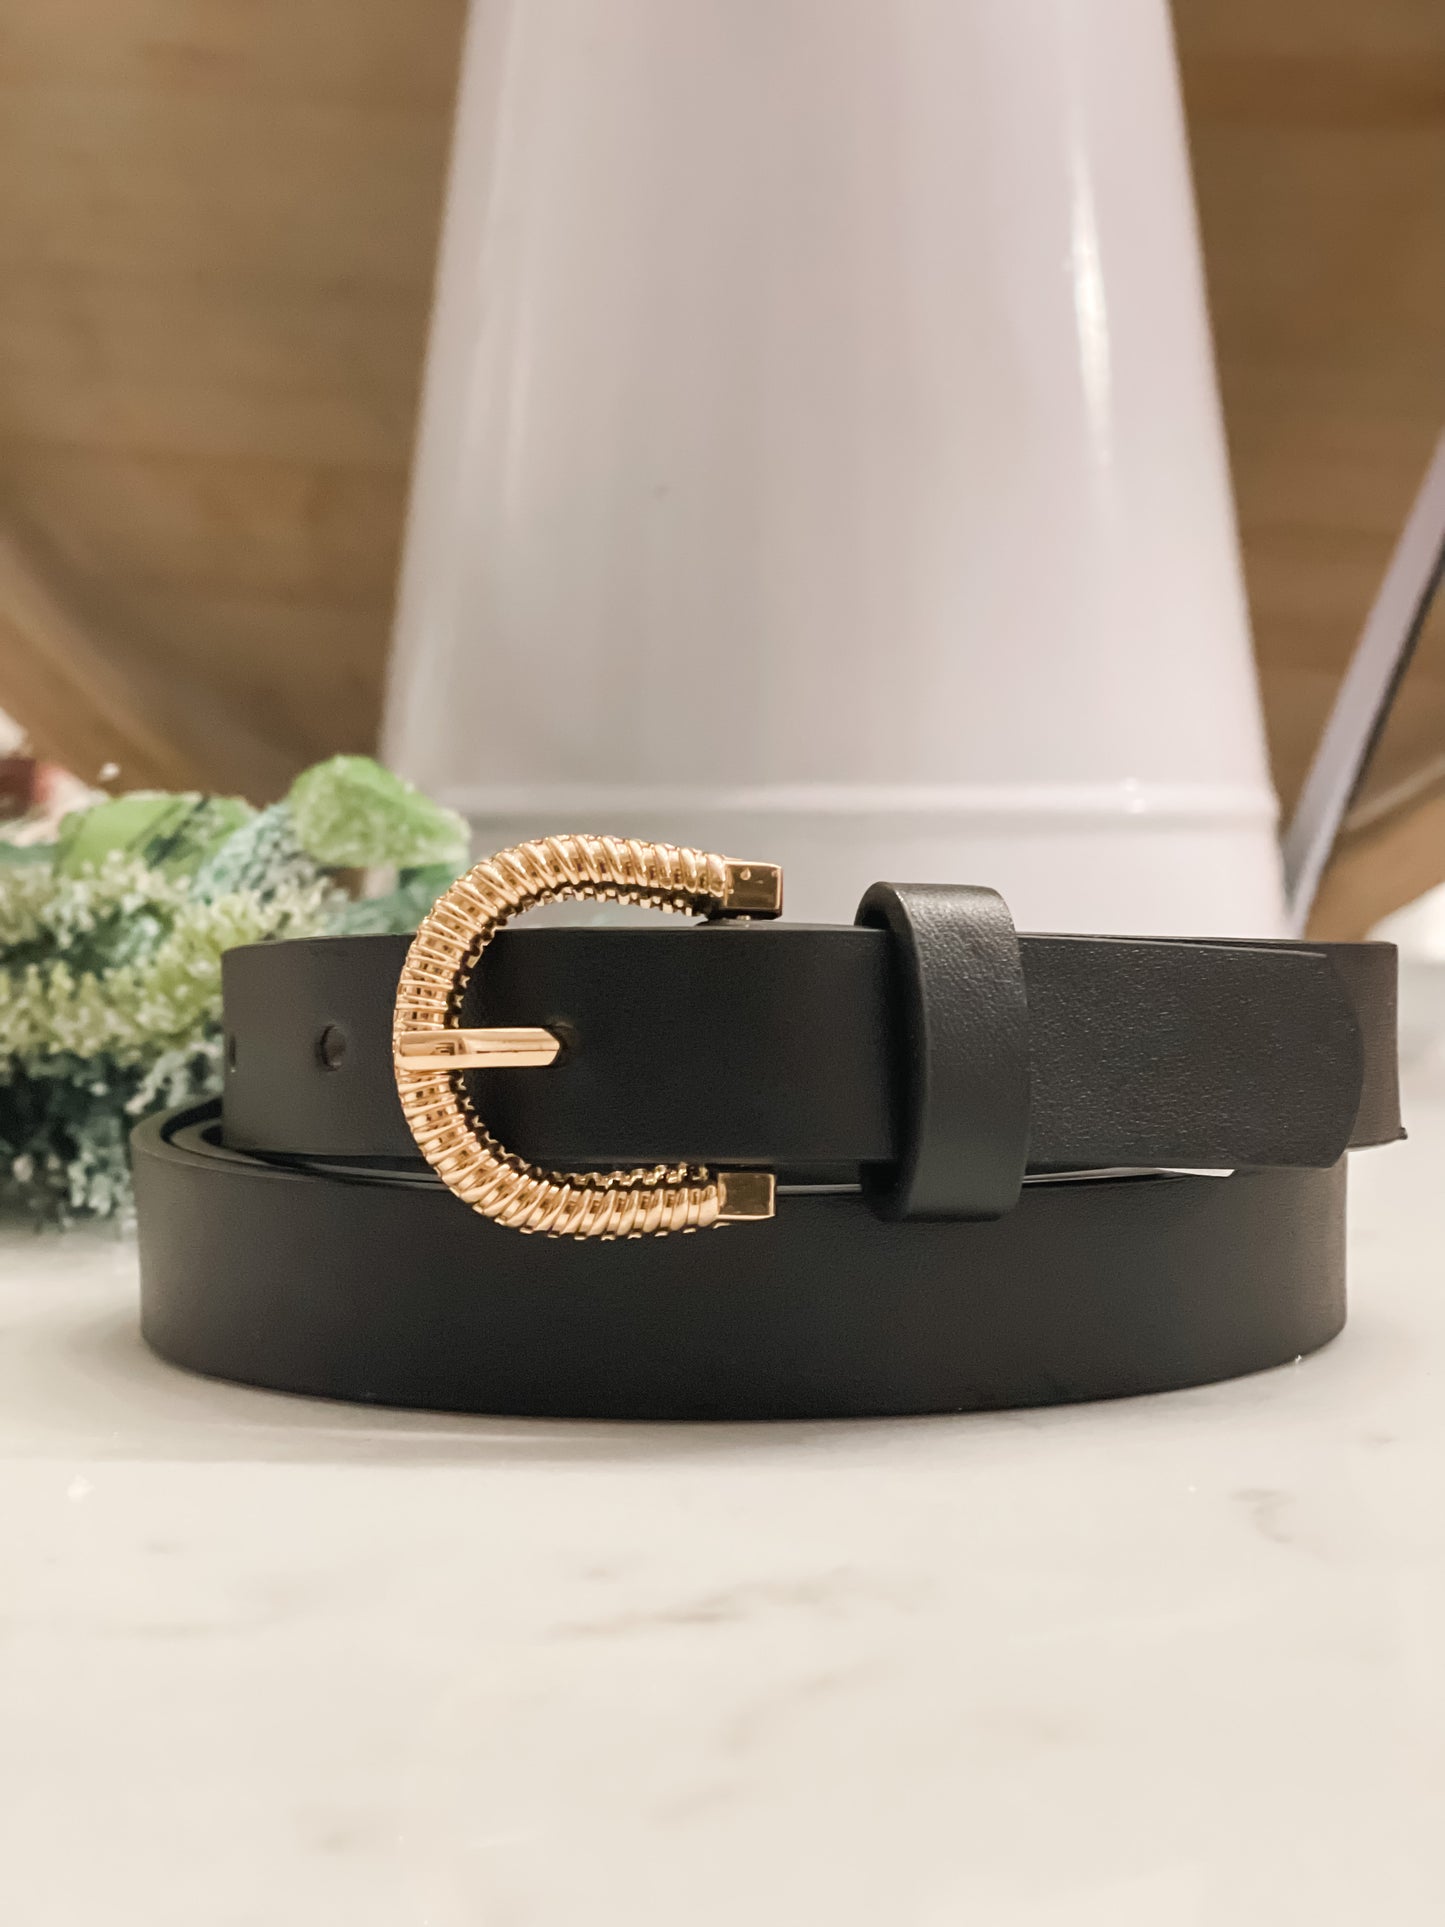 Classic black belt with gold detailing as a buckle